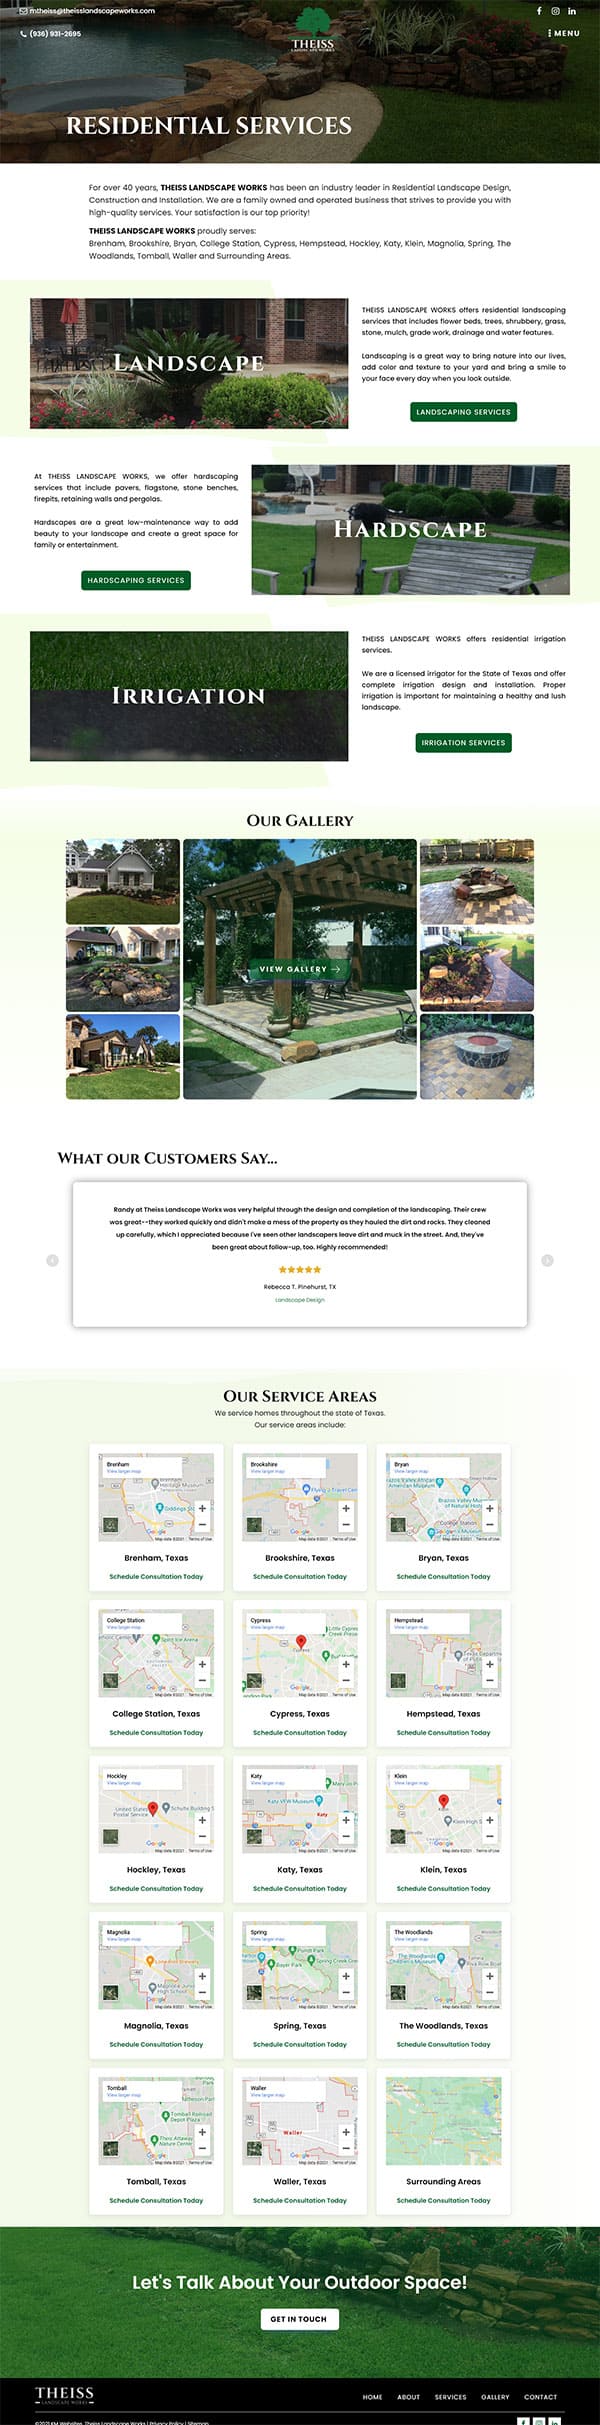 Theiss Landscape Works Residential Services Page